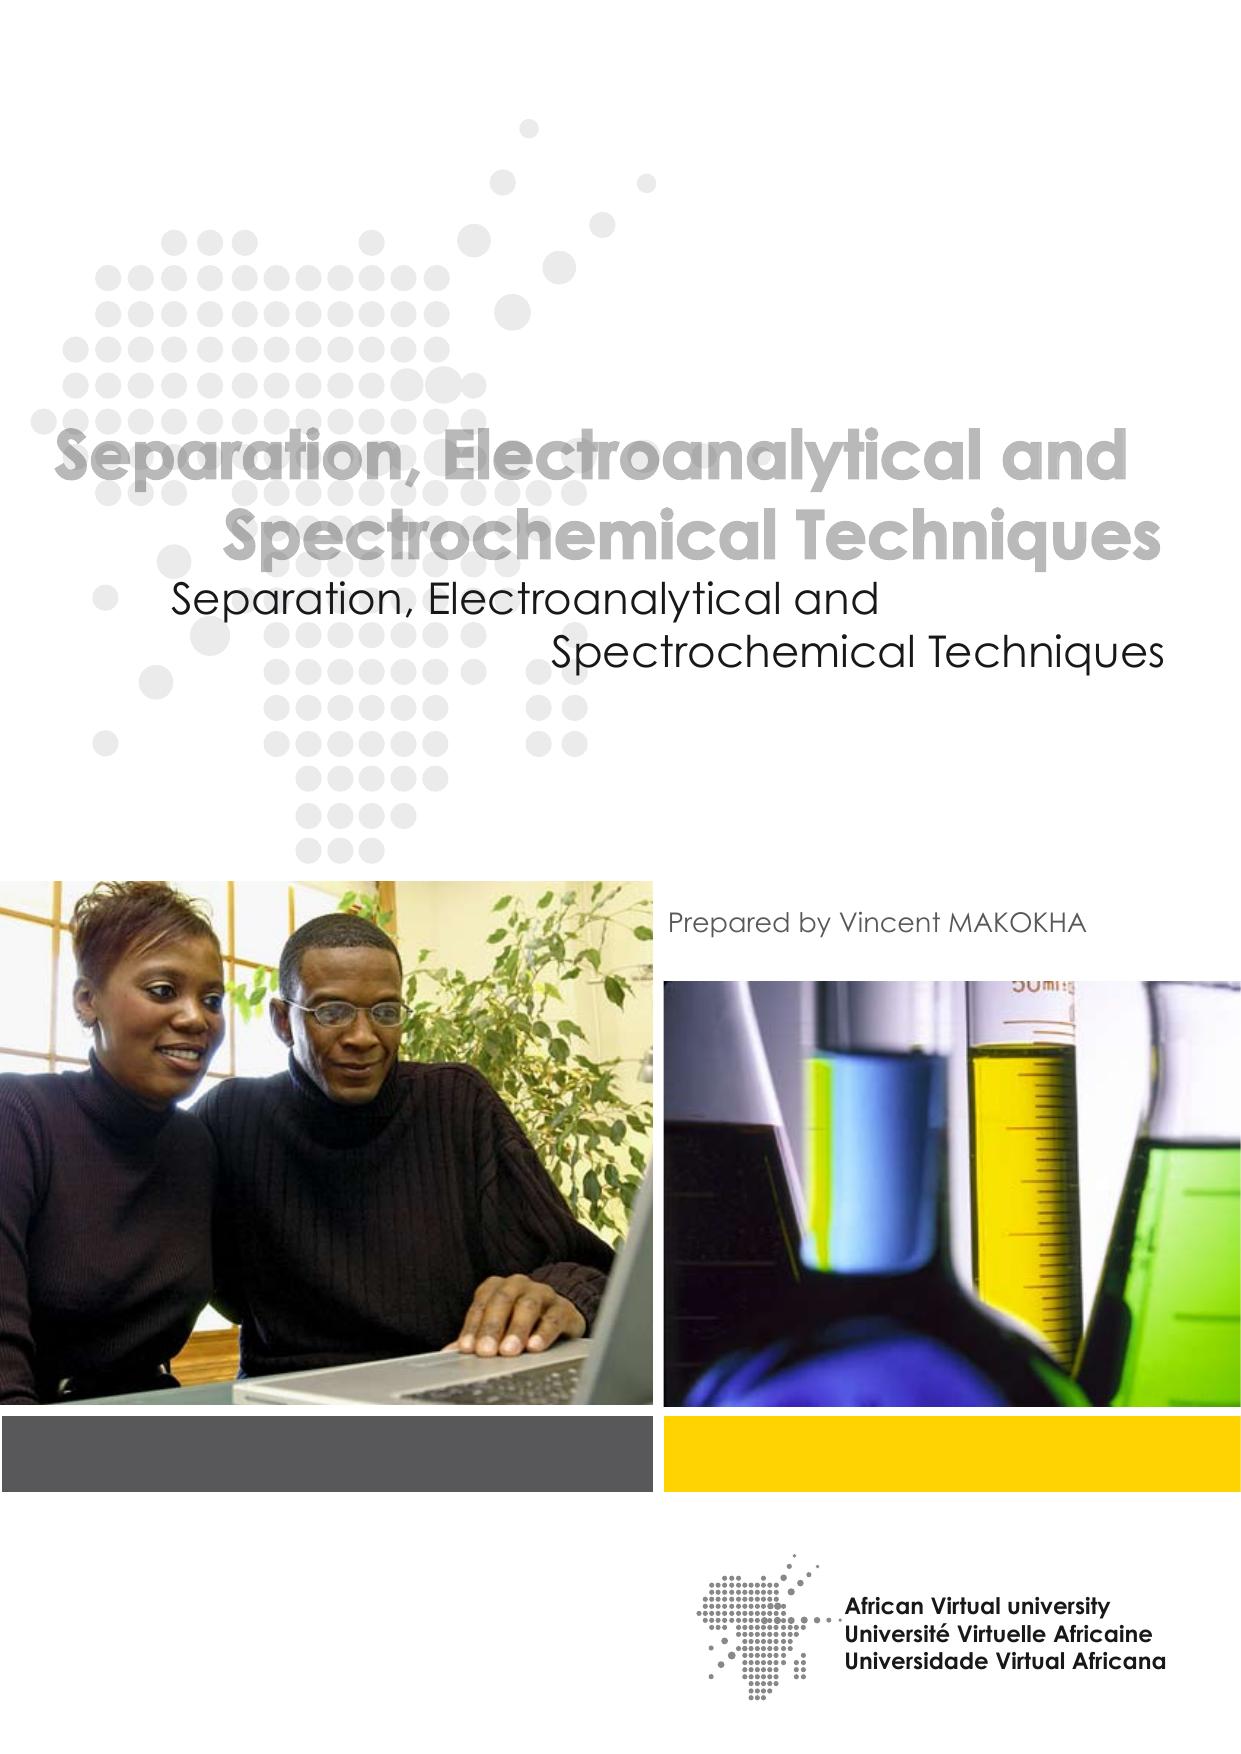 Separation, Electroanalytical and Spectrochemical Techniques